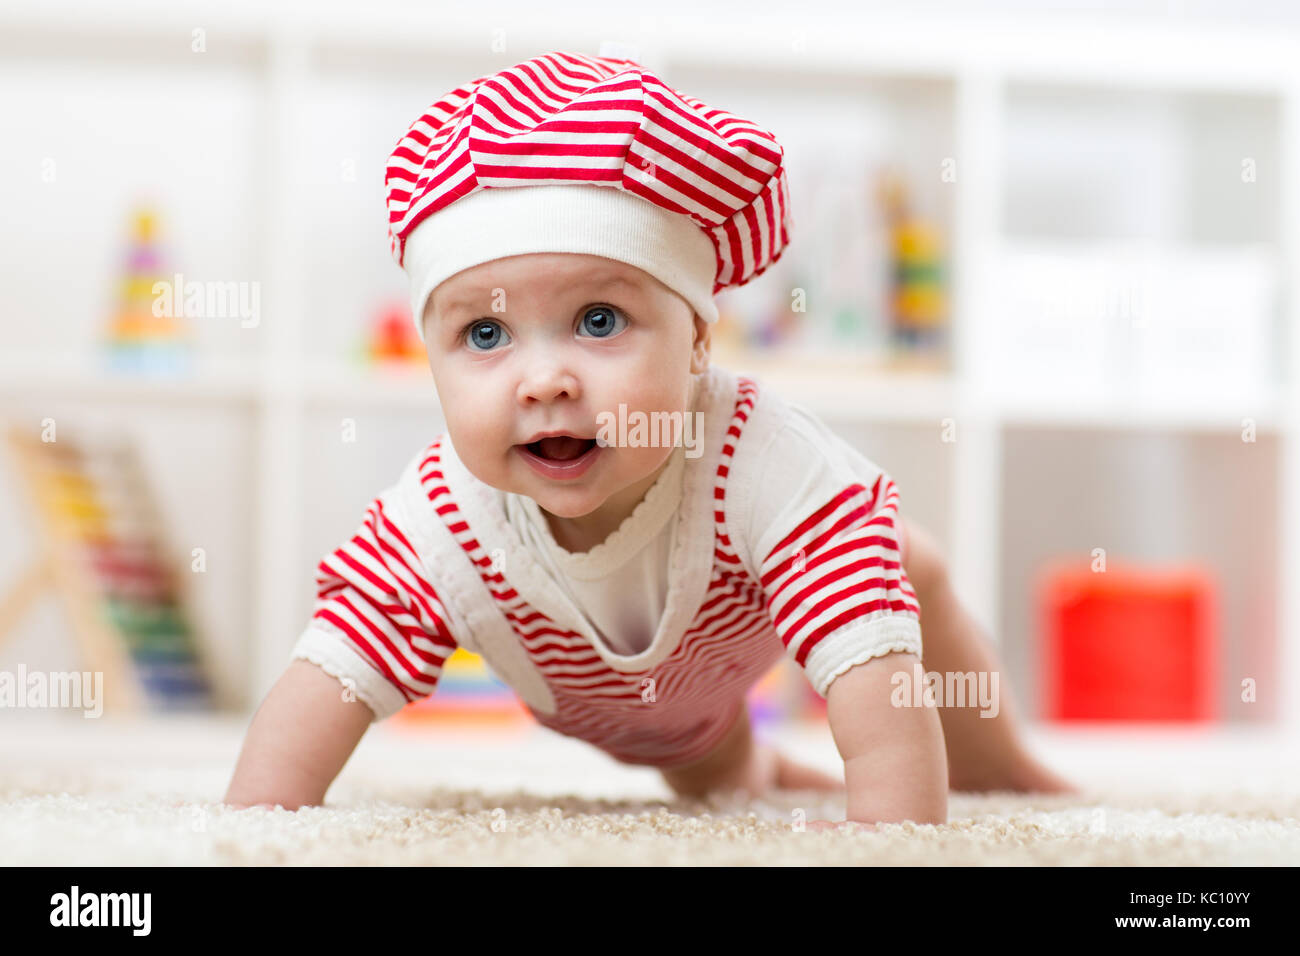 Six months old baby girl crawling on fluffy floor in nursery Stock Photo